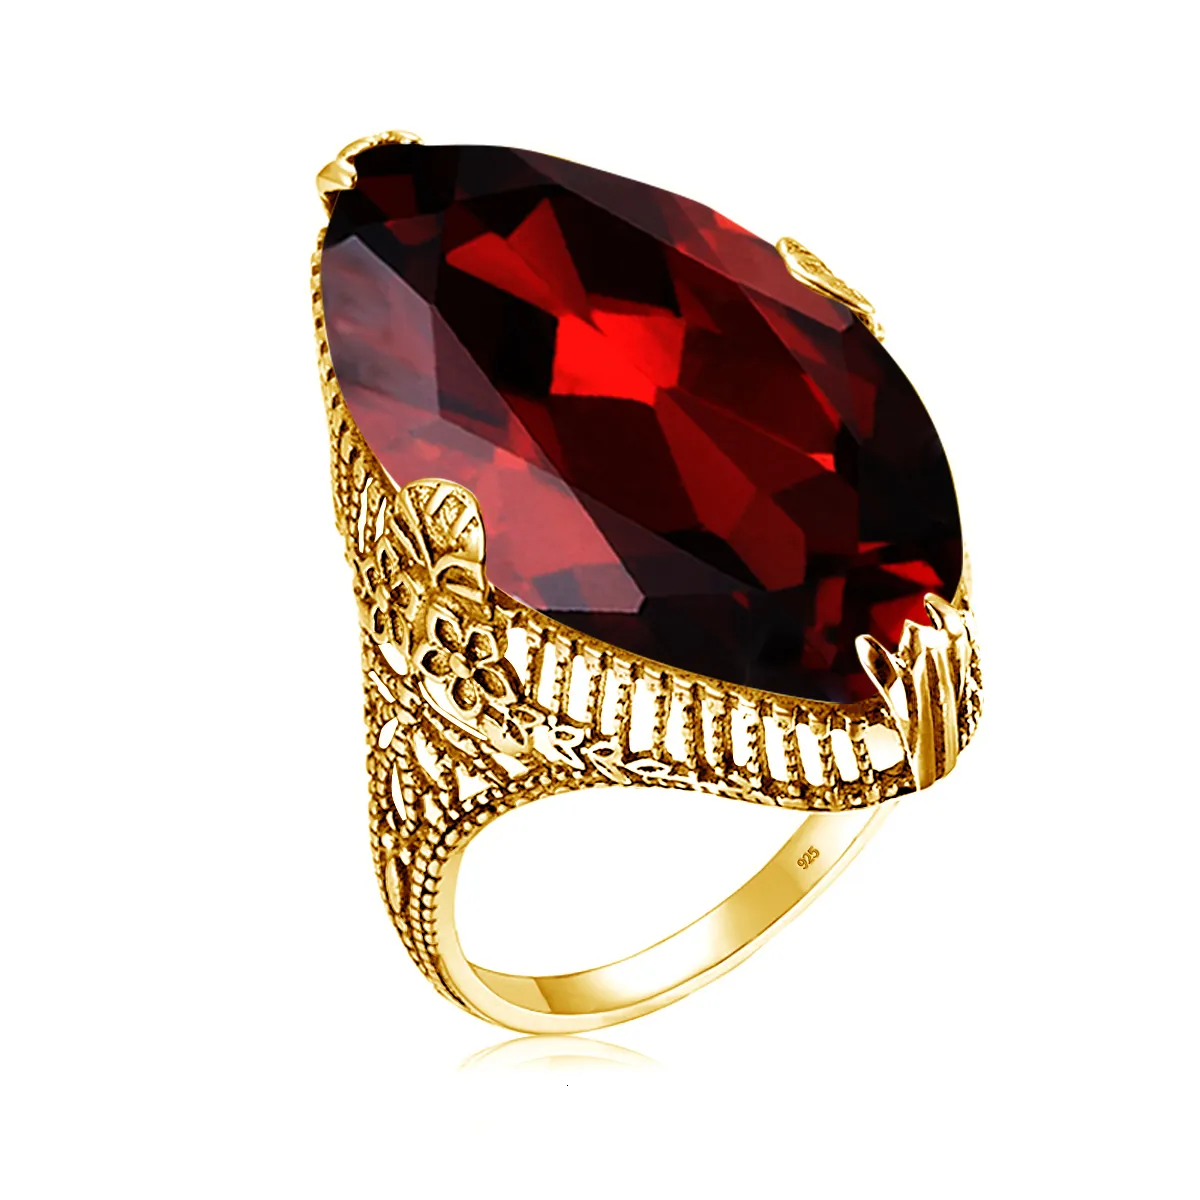 Wedding Rings Szjinao Gold Marquise Cut Garnet Ring Women Luxury Red Massive Stone Vitoria Party Jewelry Gift For Wife High Quality 230920